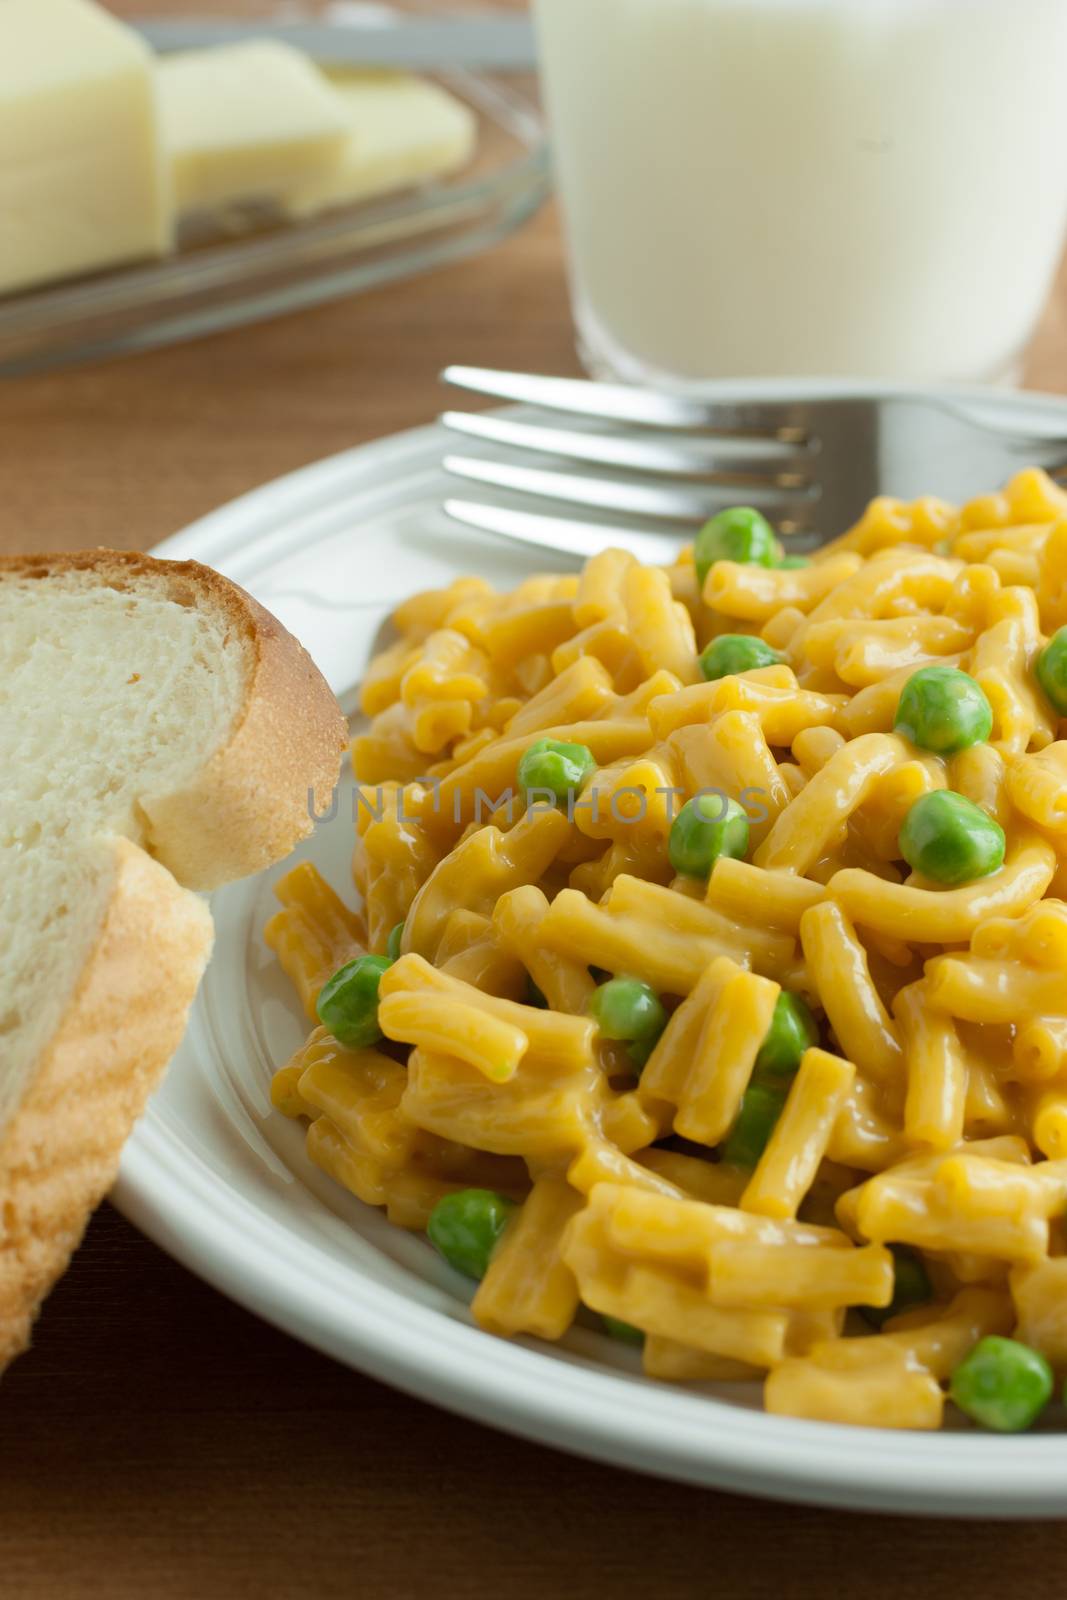 Macaroni and chesse dinner with peas, a slice of bread and butter, and a glass of milk.